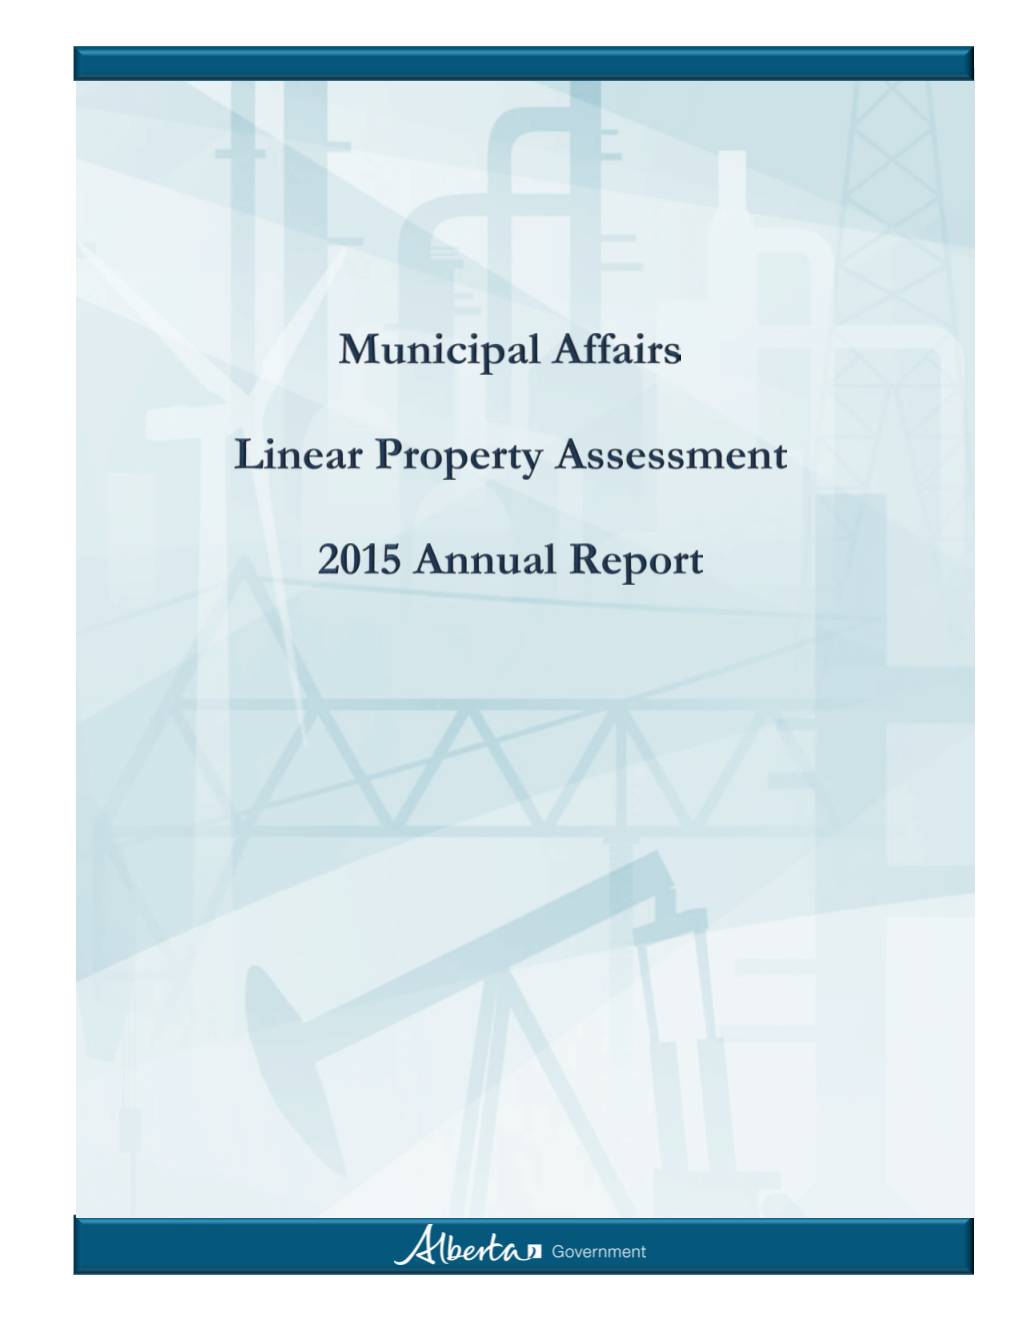 2012 Tax Year Linear Property Assessment Report